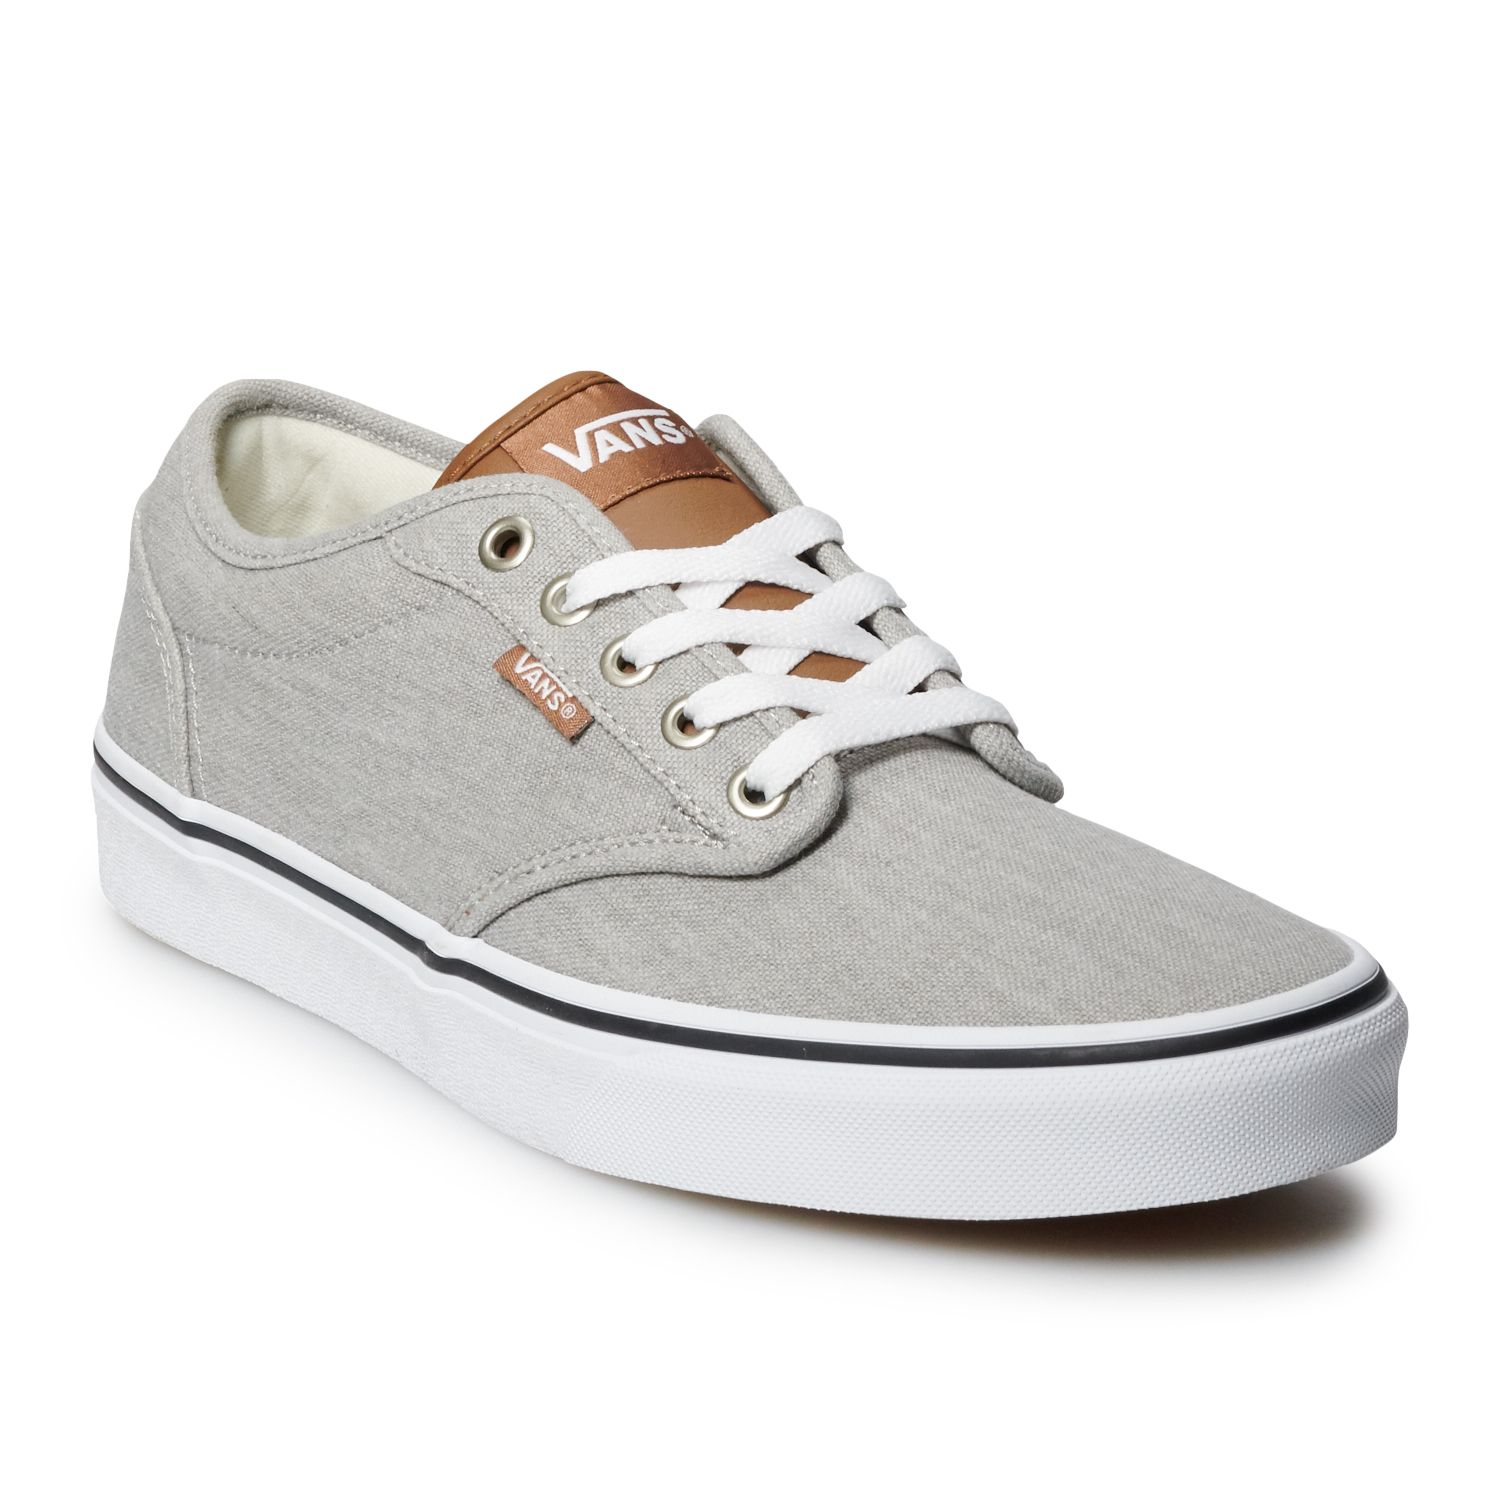 vans atwood all white